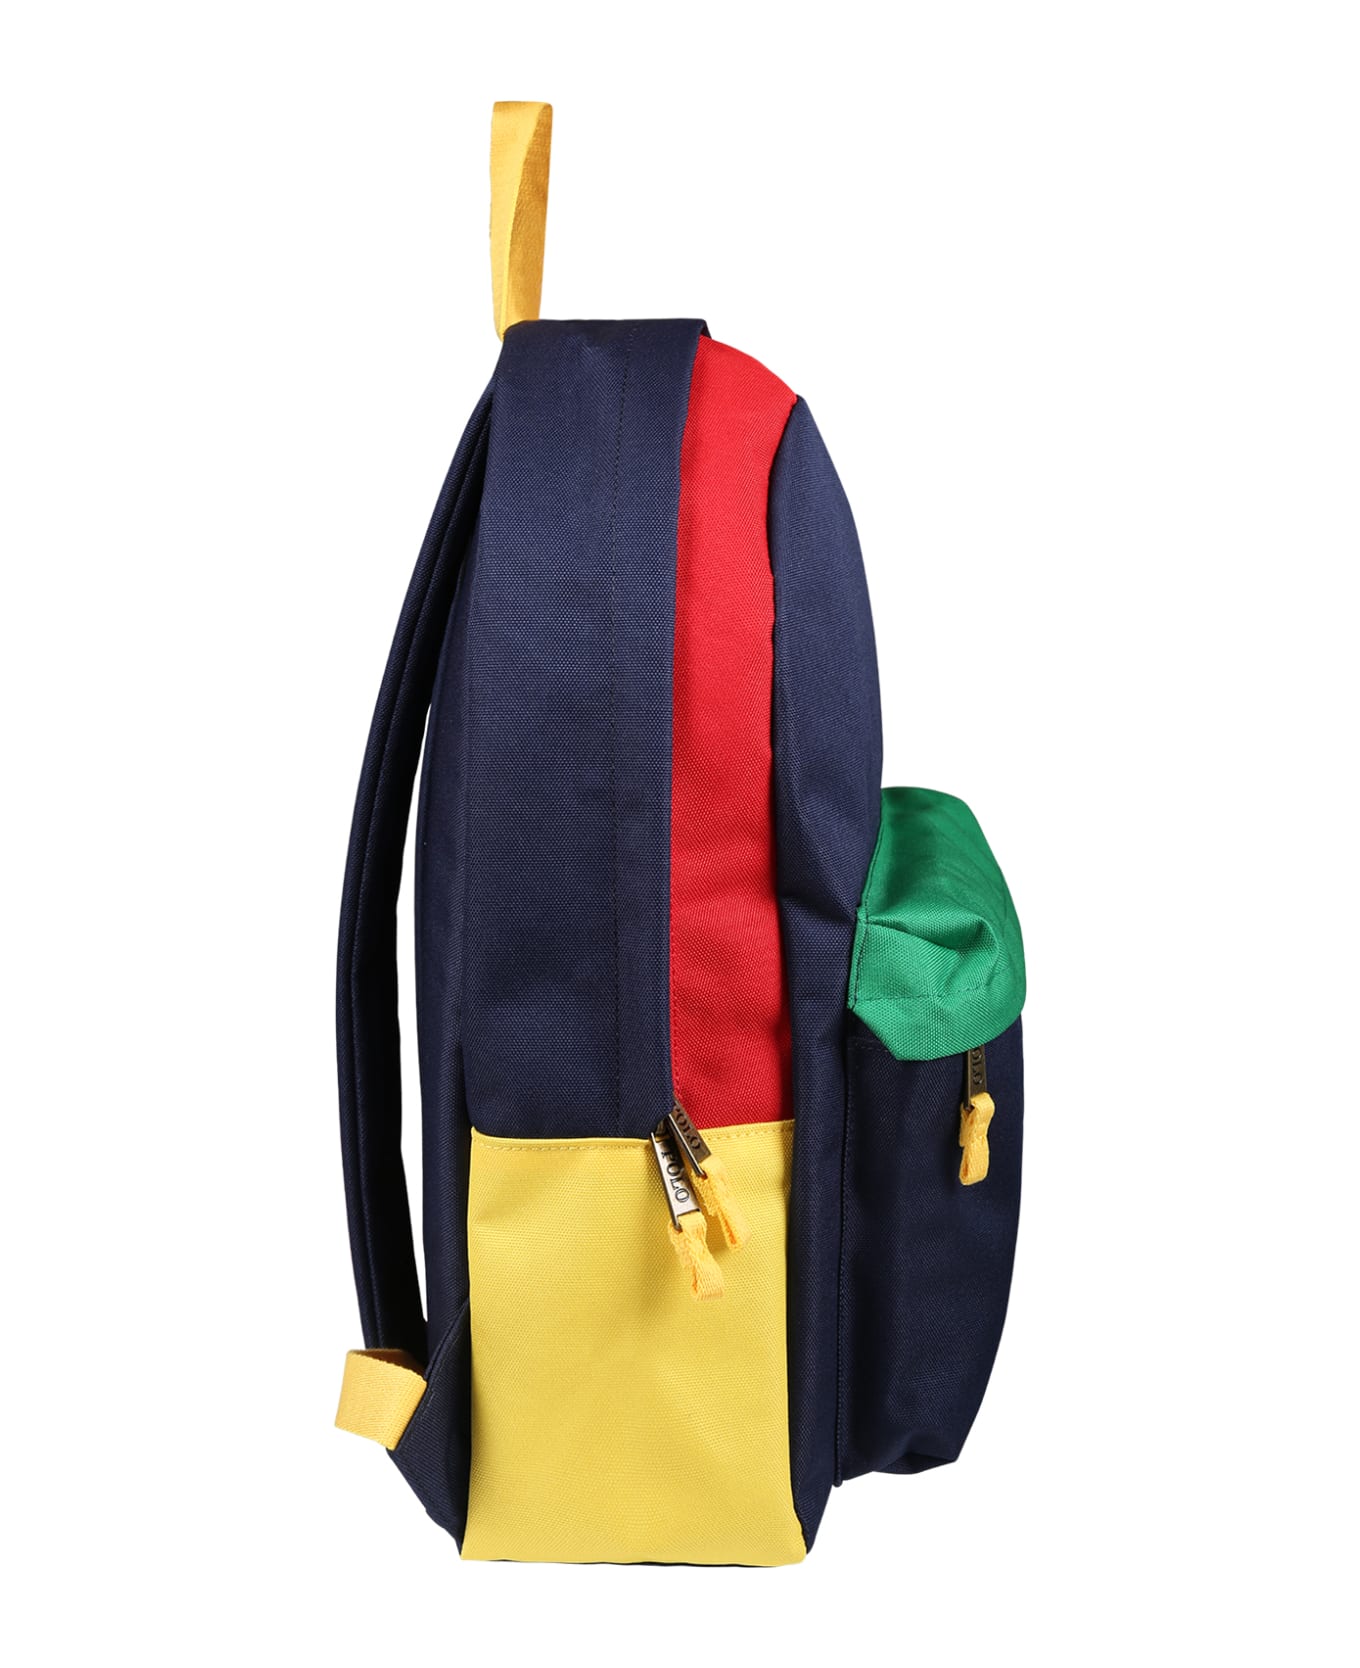 Ralph Lauren Colorblock Backpack With Bear For Kids - Multicolor アクセサリー＆ギフト